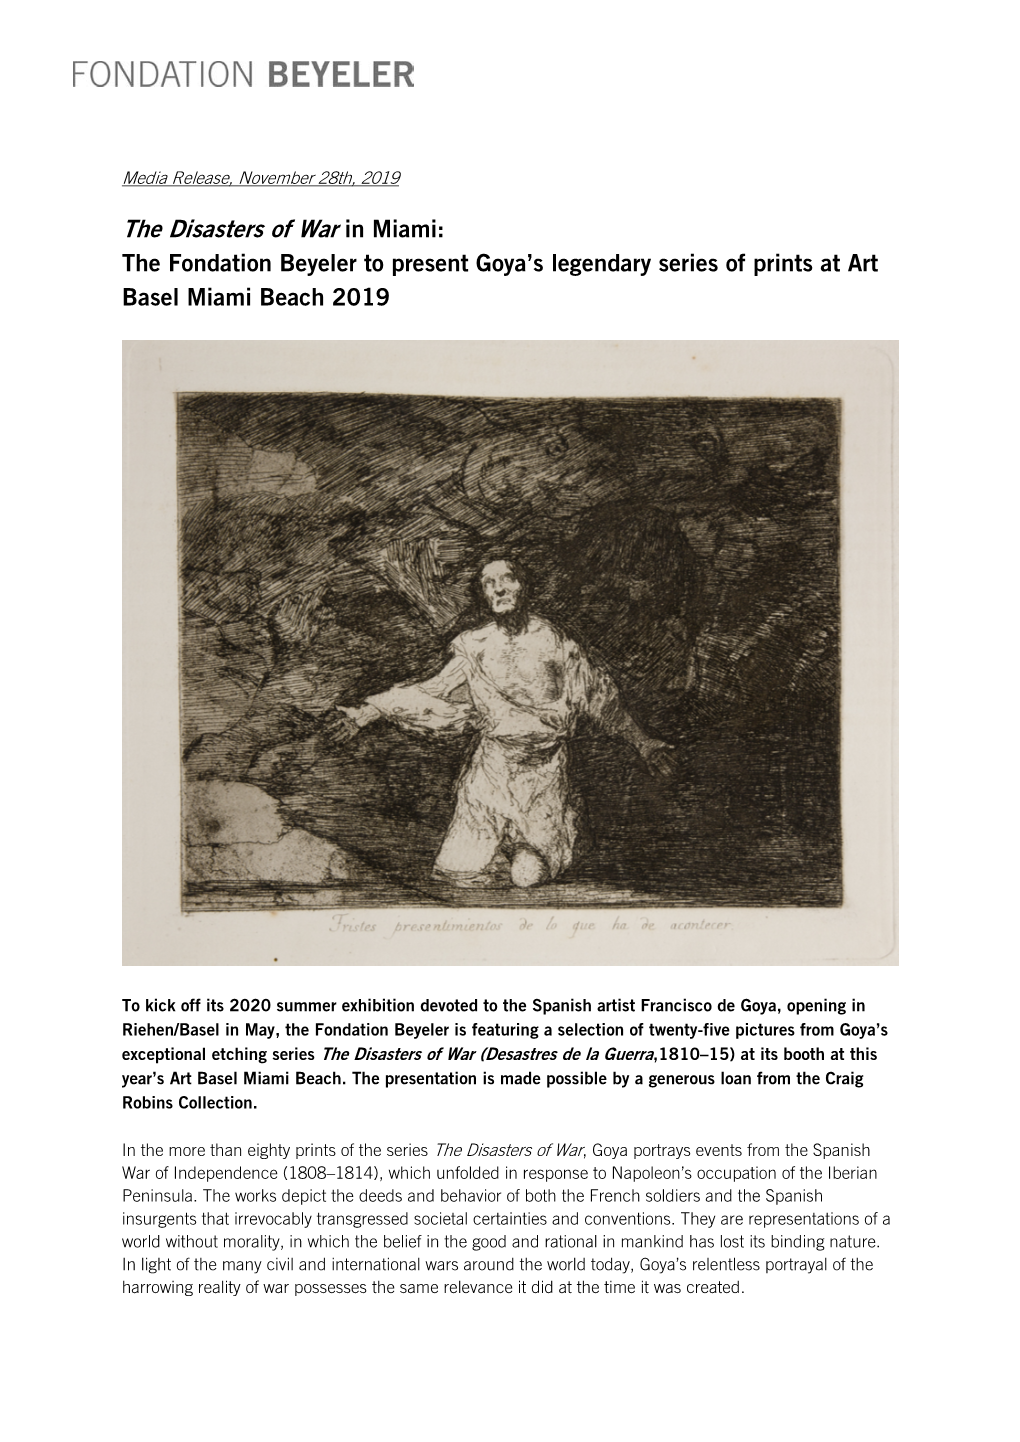 The Disasters of War in Miami: the Fondation Beyeler to Present Goya’S Legendary Series of Prints at Art Basel Miami Beach 2019